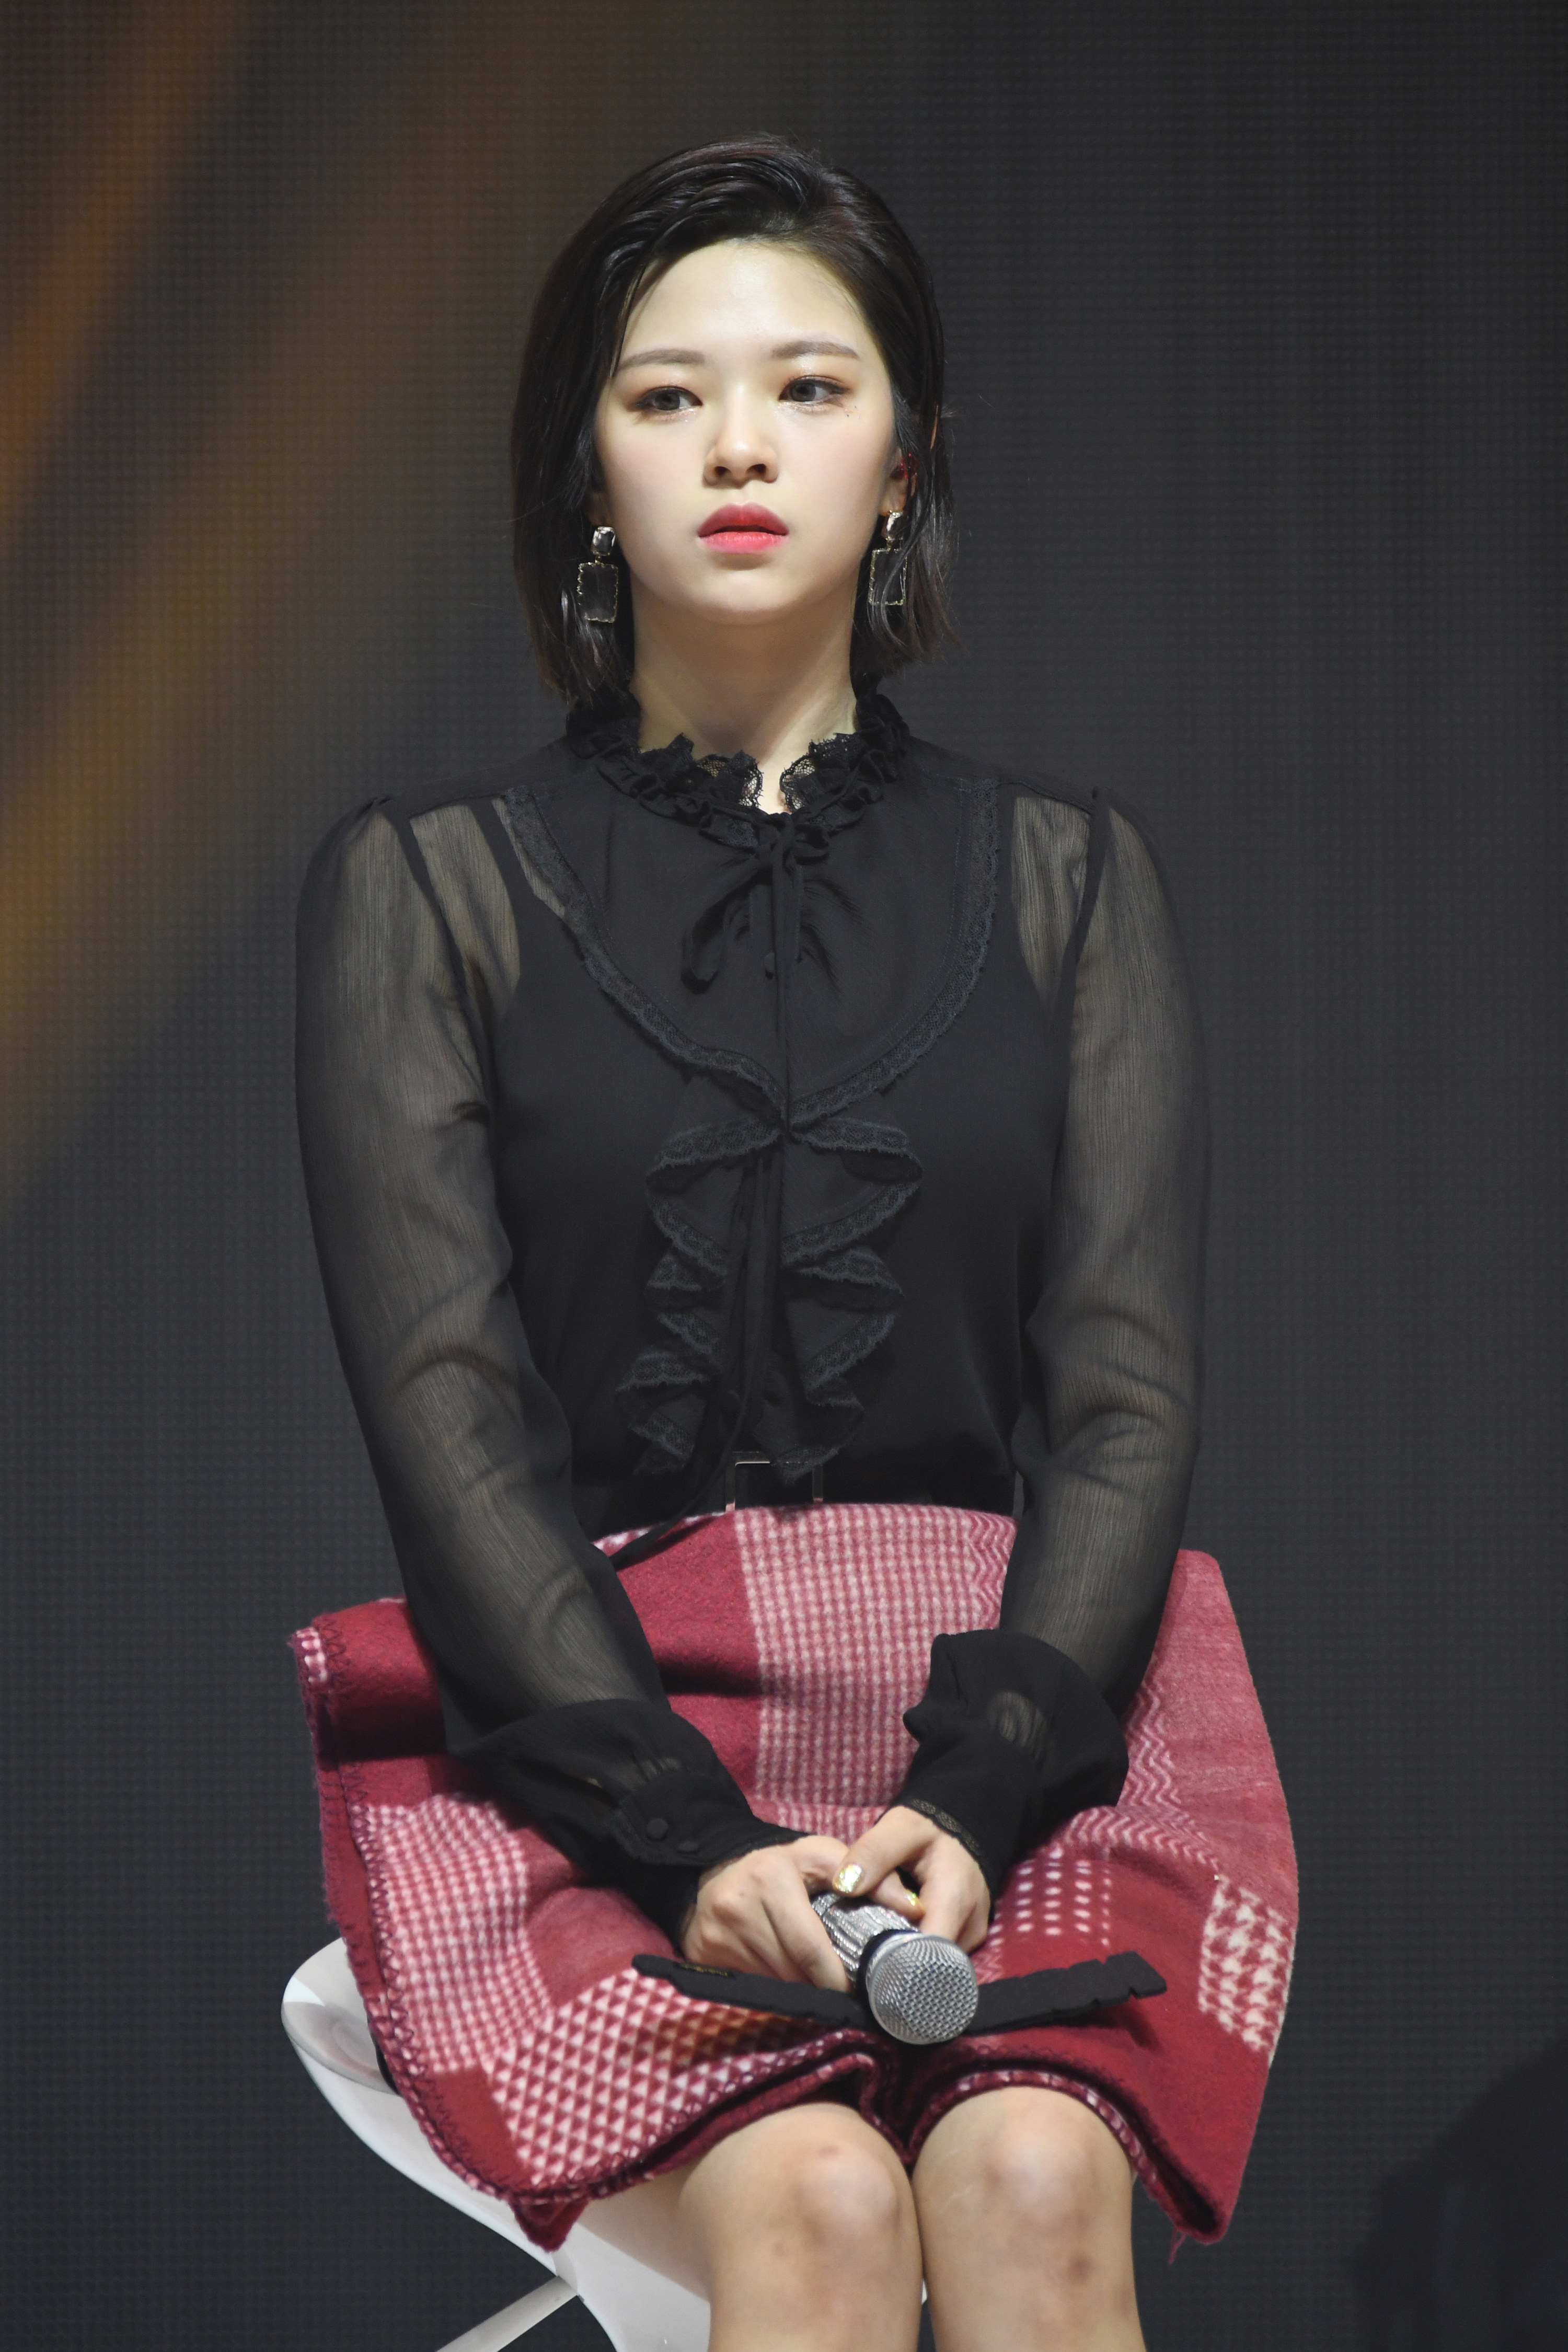 Jeongyeon sitting on stage and looking at the crowd